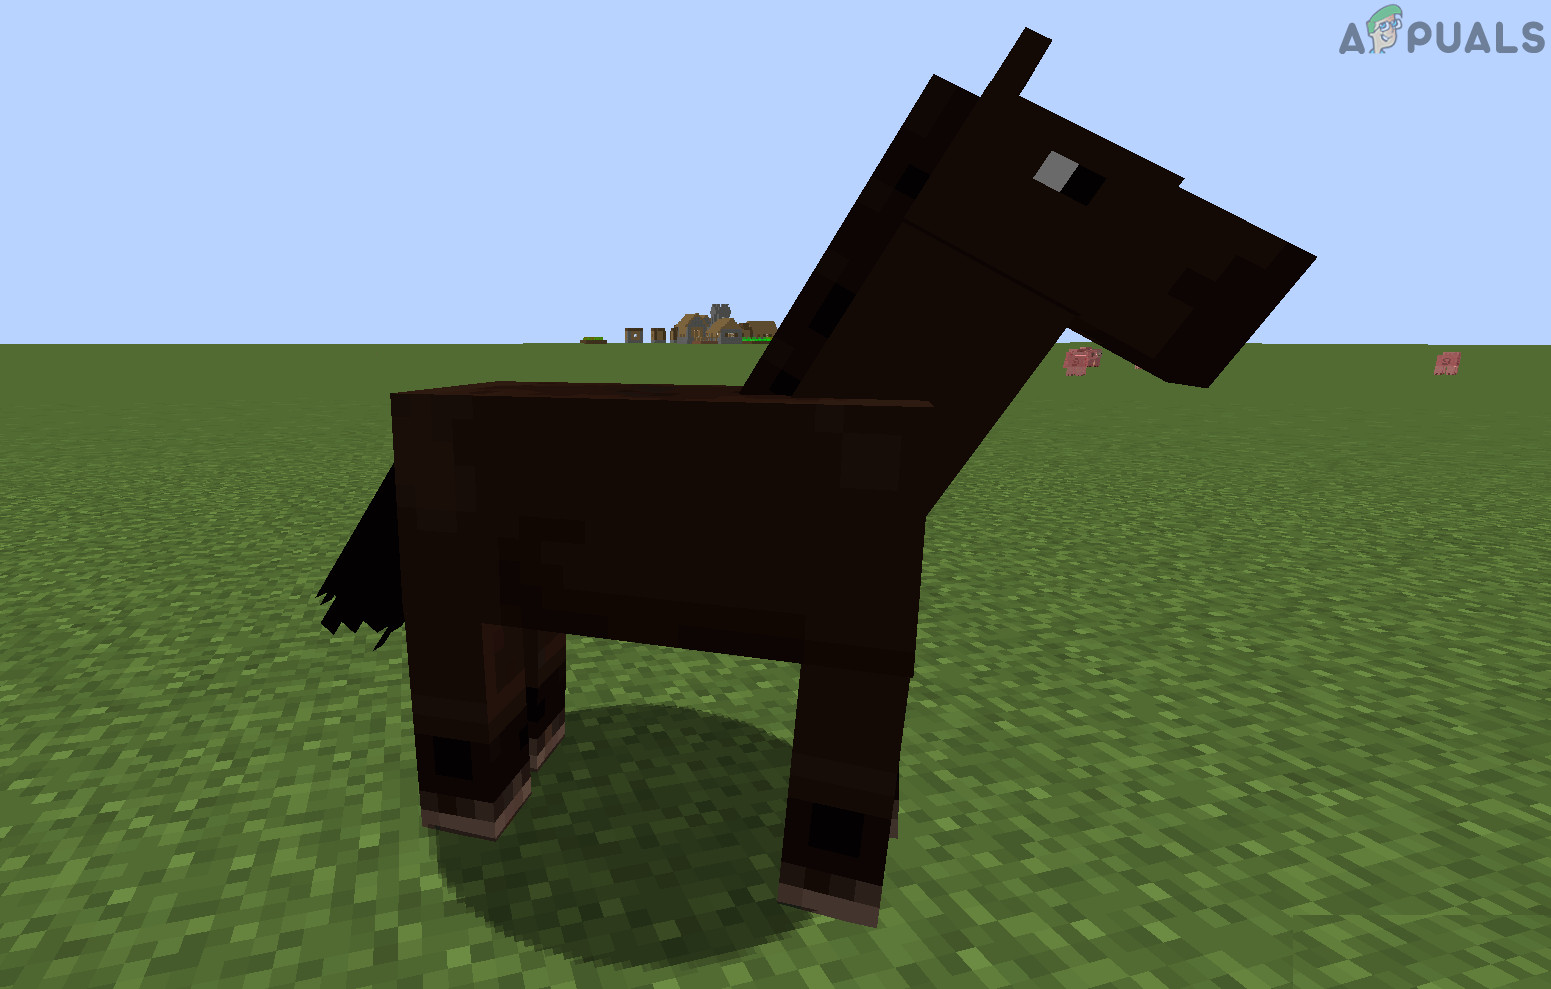 How To Make A Saddle In Minecraft Appuals Com